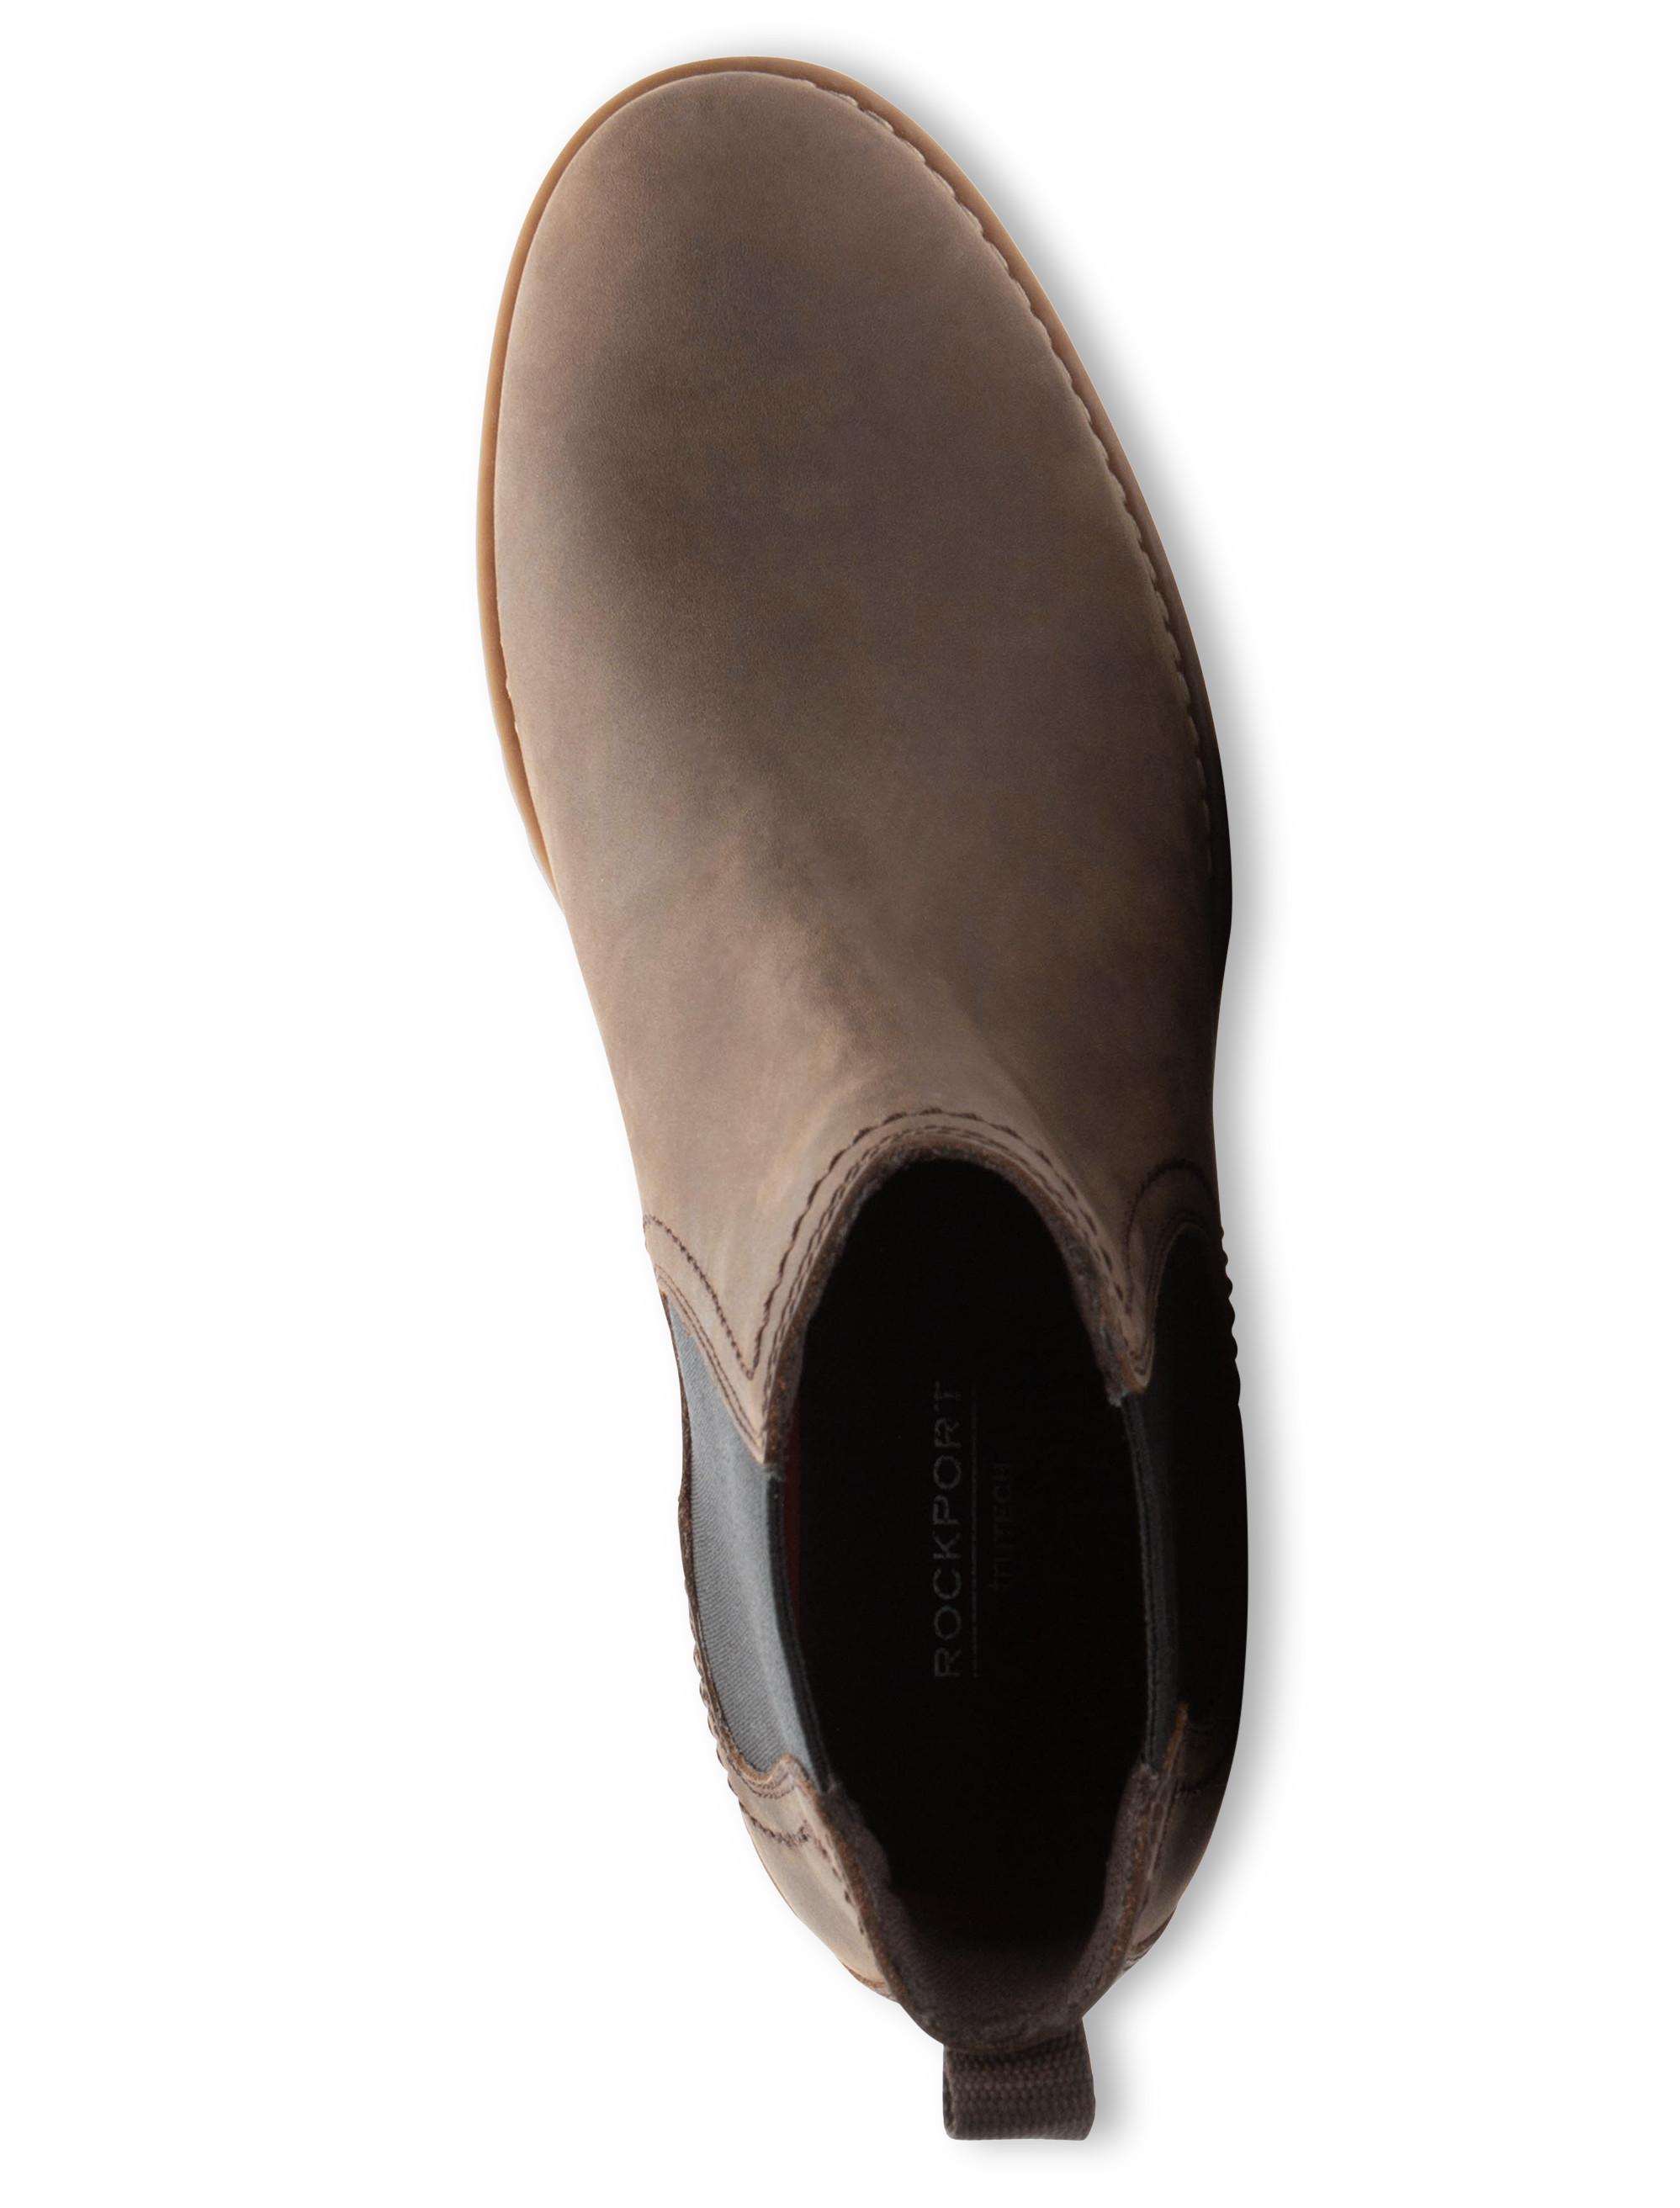 Rockport Big & Tall Mitchell Chelsea Boots in Brown for Men | Lyst